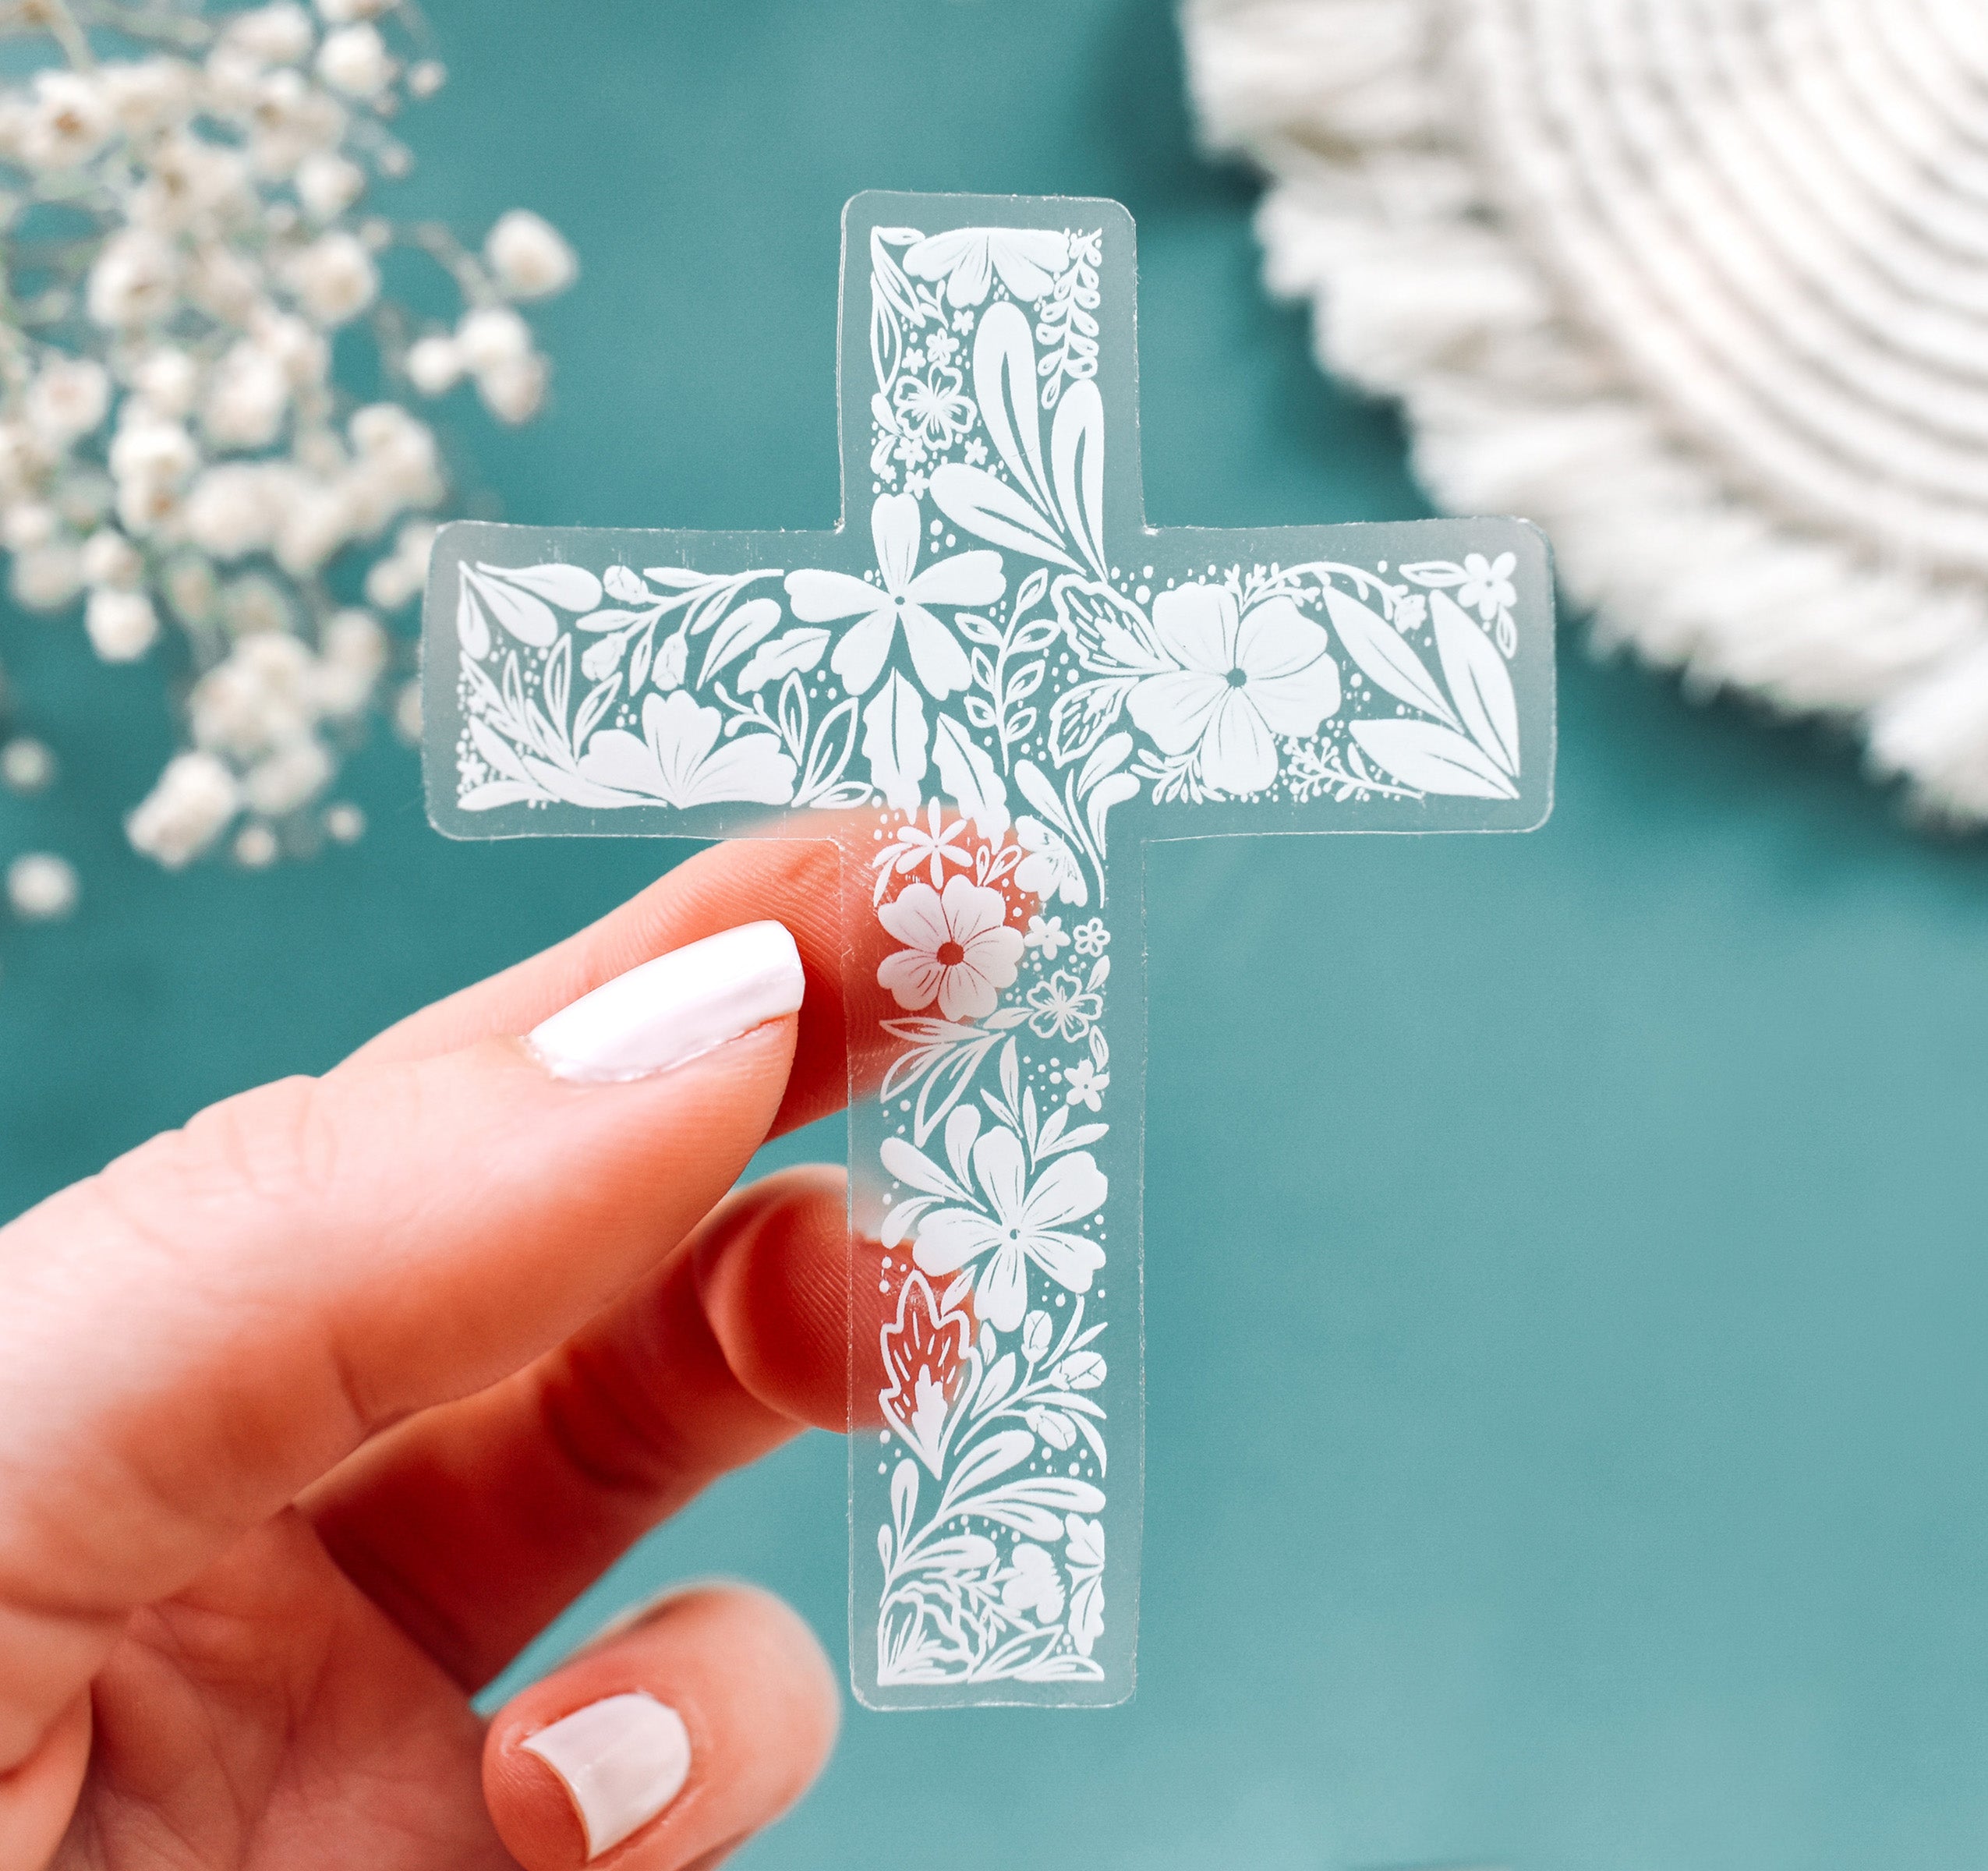 Christian cross with white botanical flowers on a clear vinyl sticker